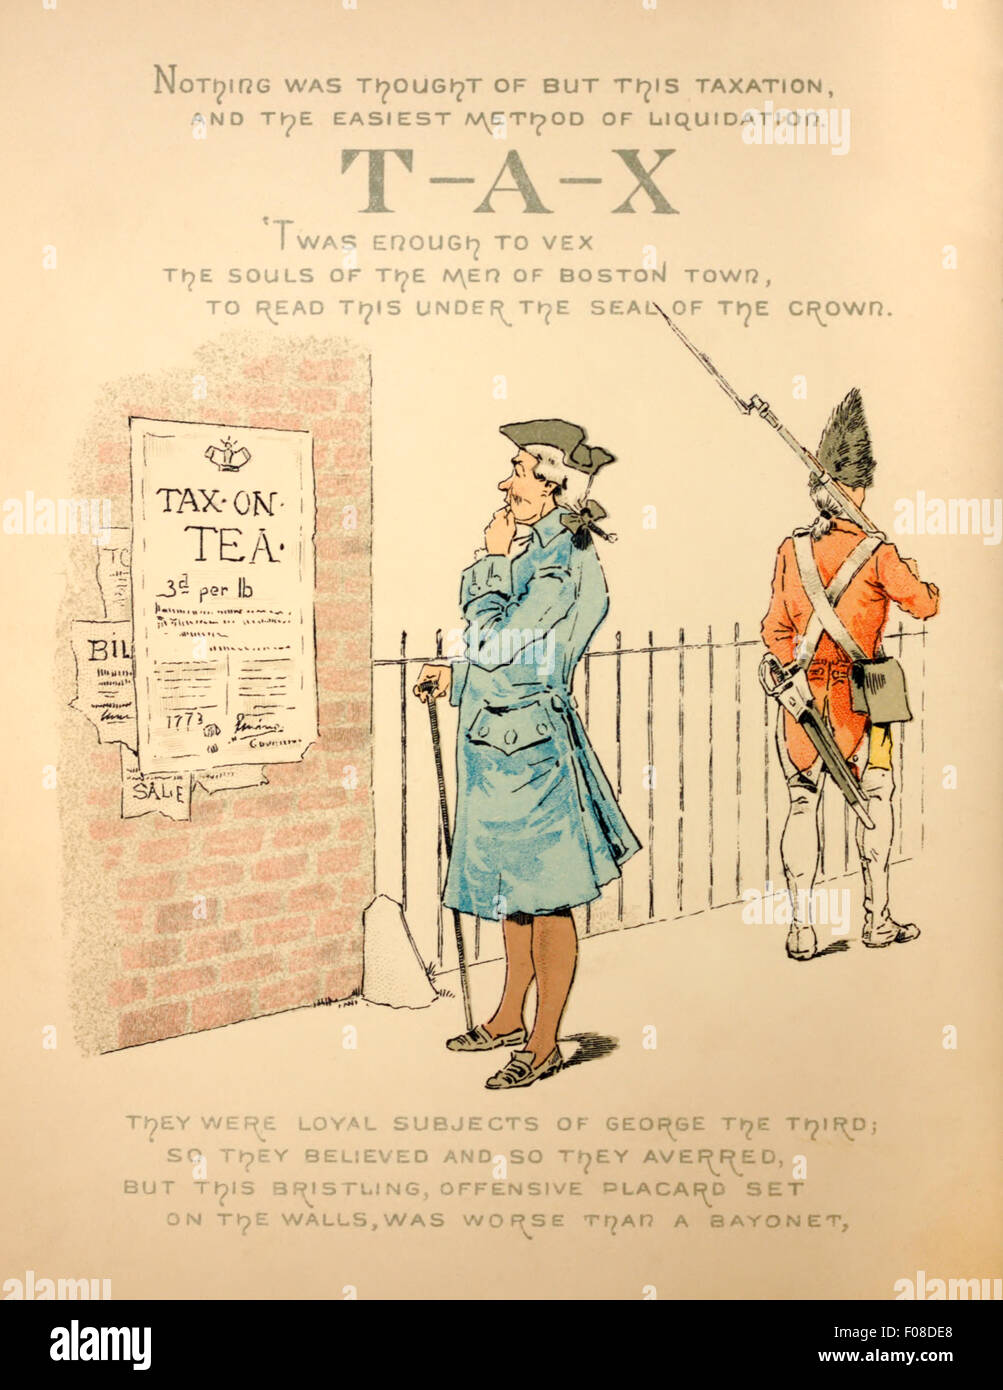 American colonist reads about the new tax on tea, a British soldier marches on behind. Illustration by Josephine Pollard (1834-1892). See description for more information. Stock Photo